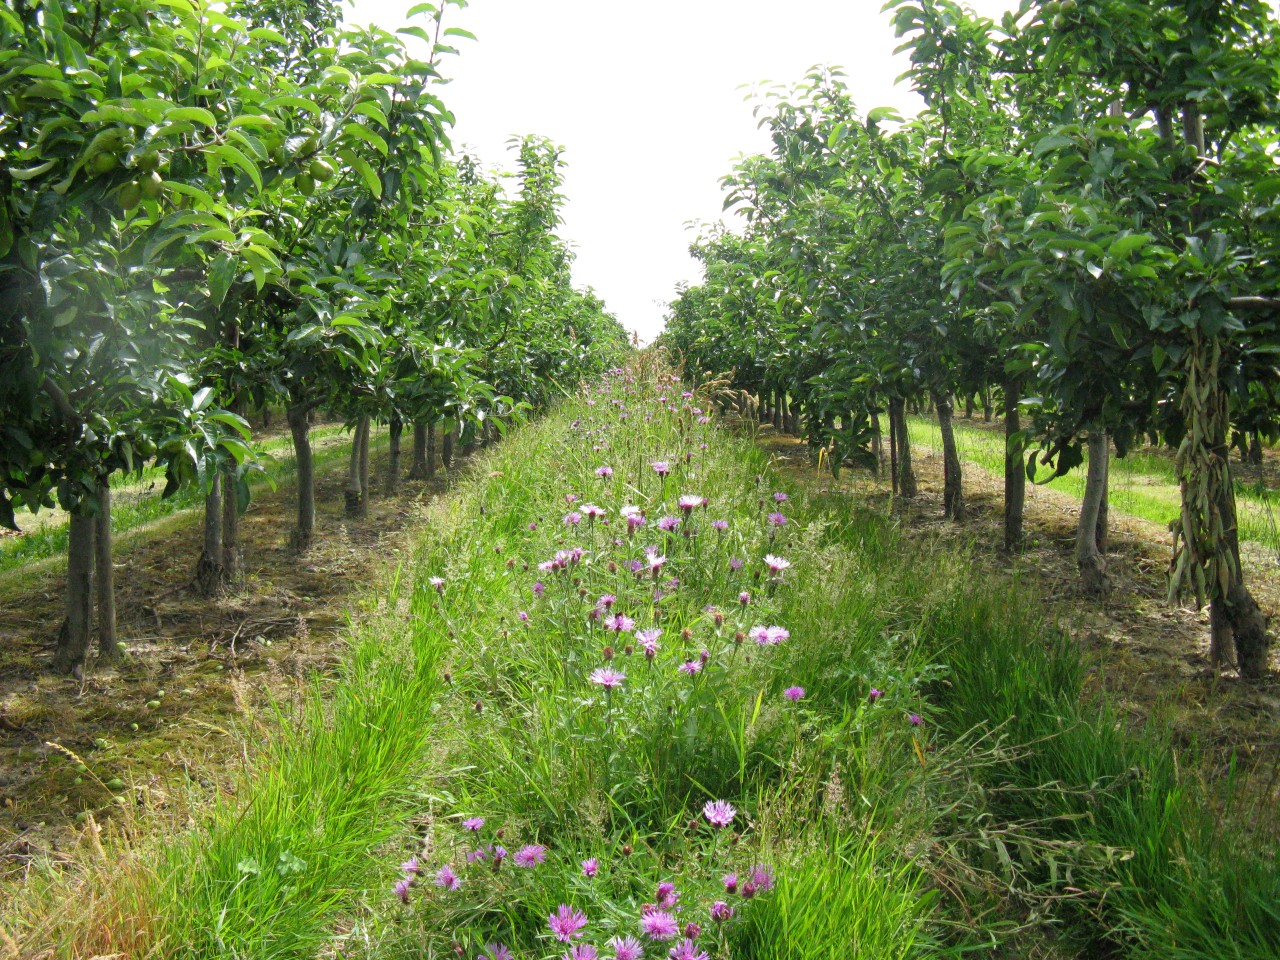  Wild flower strips have been established in orchards to enhance mycorrhizal populations